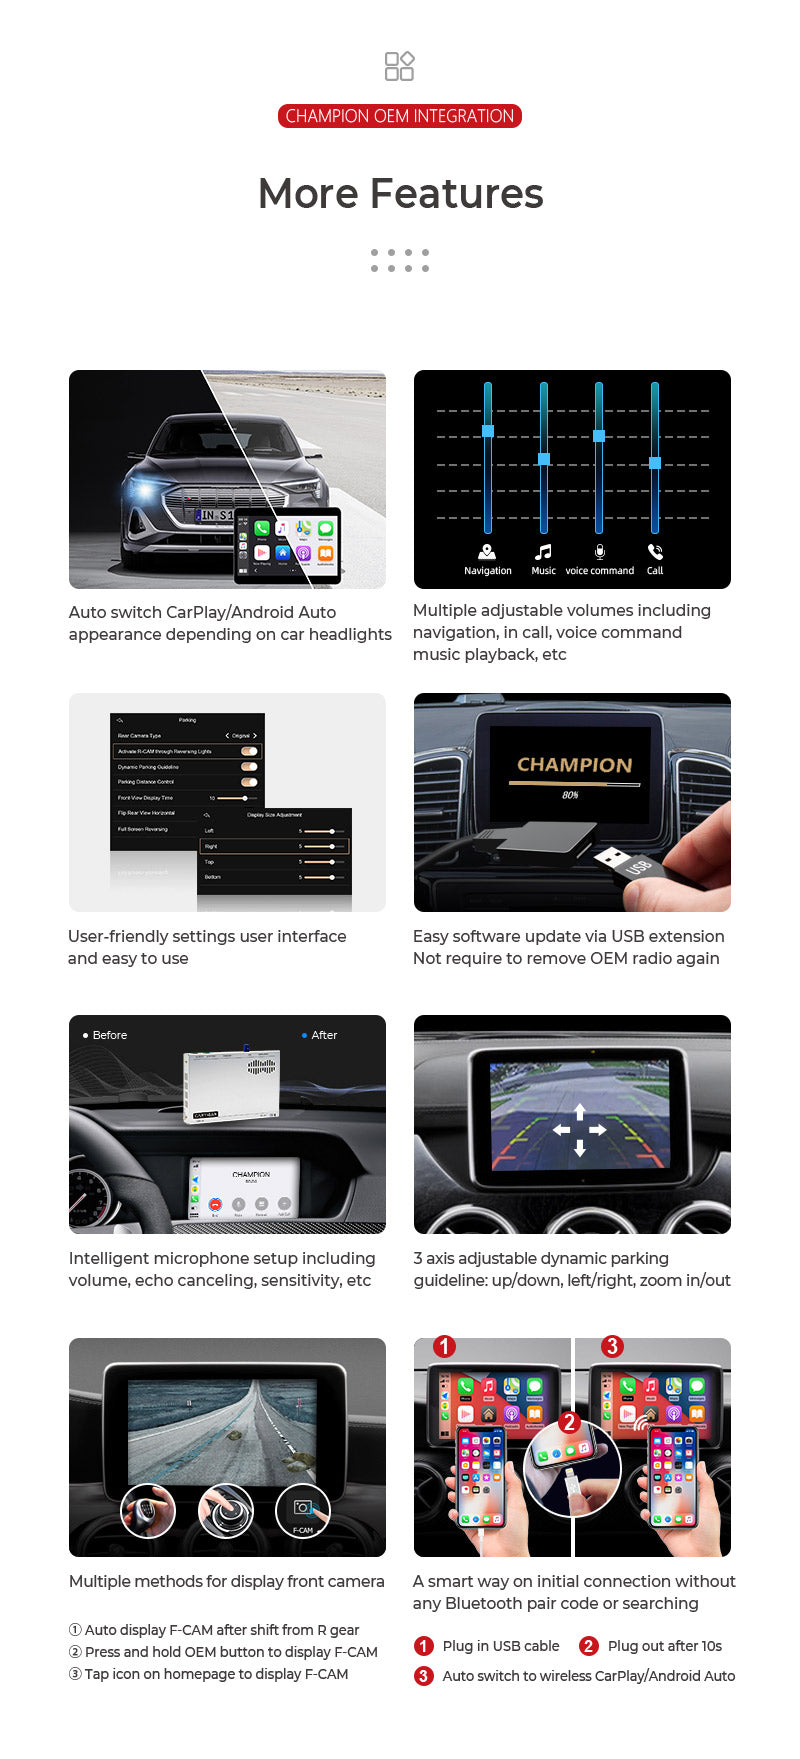 Multimedia interface wireless CarPlay/Android Auto/Mirroring adapter for  Mercedes-Benz A/B/C/E/CLA/GLA/GLK/ML class NTG 4.5/4.7